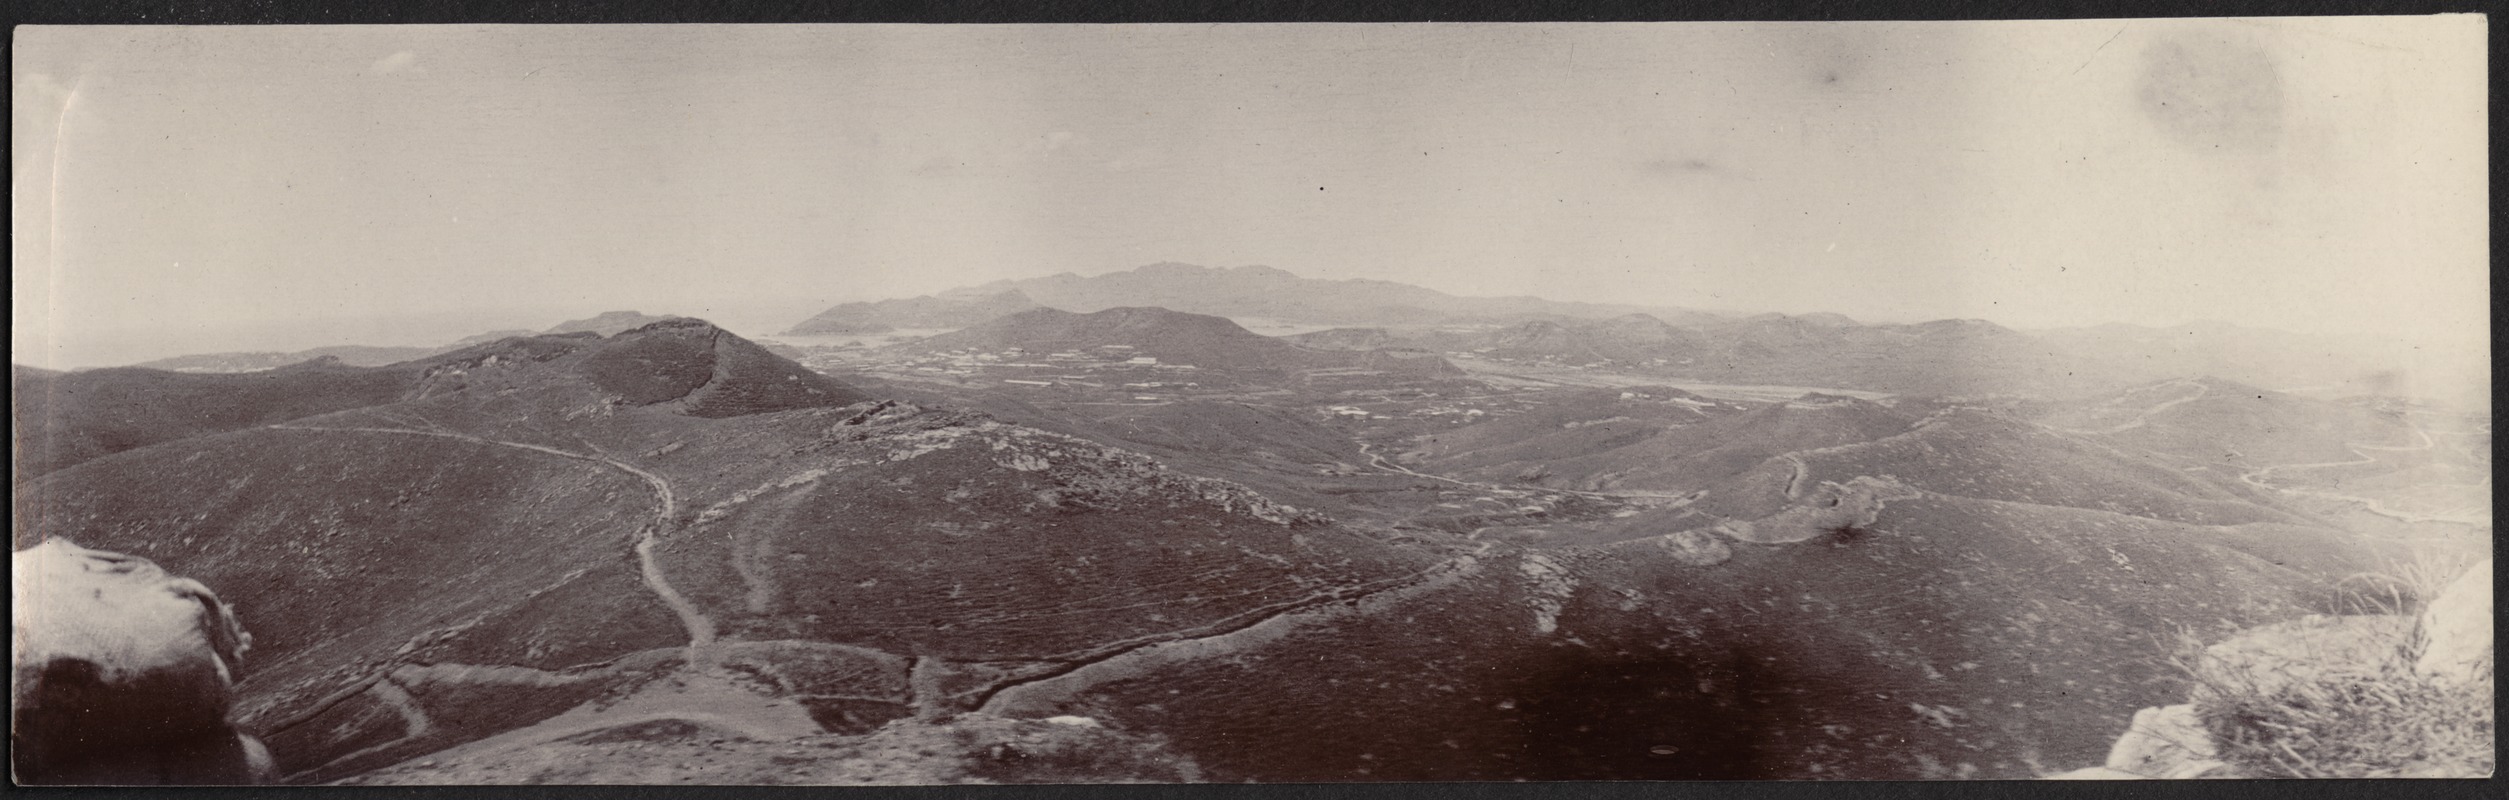 Panoramic view of mountains and roads